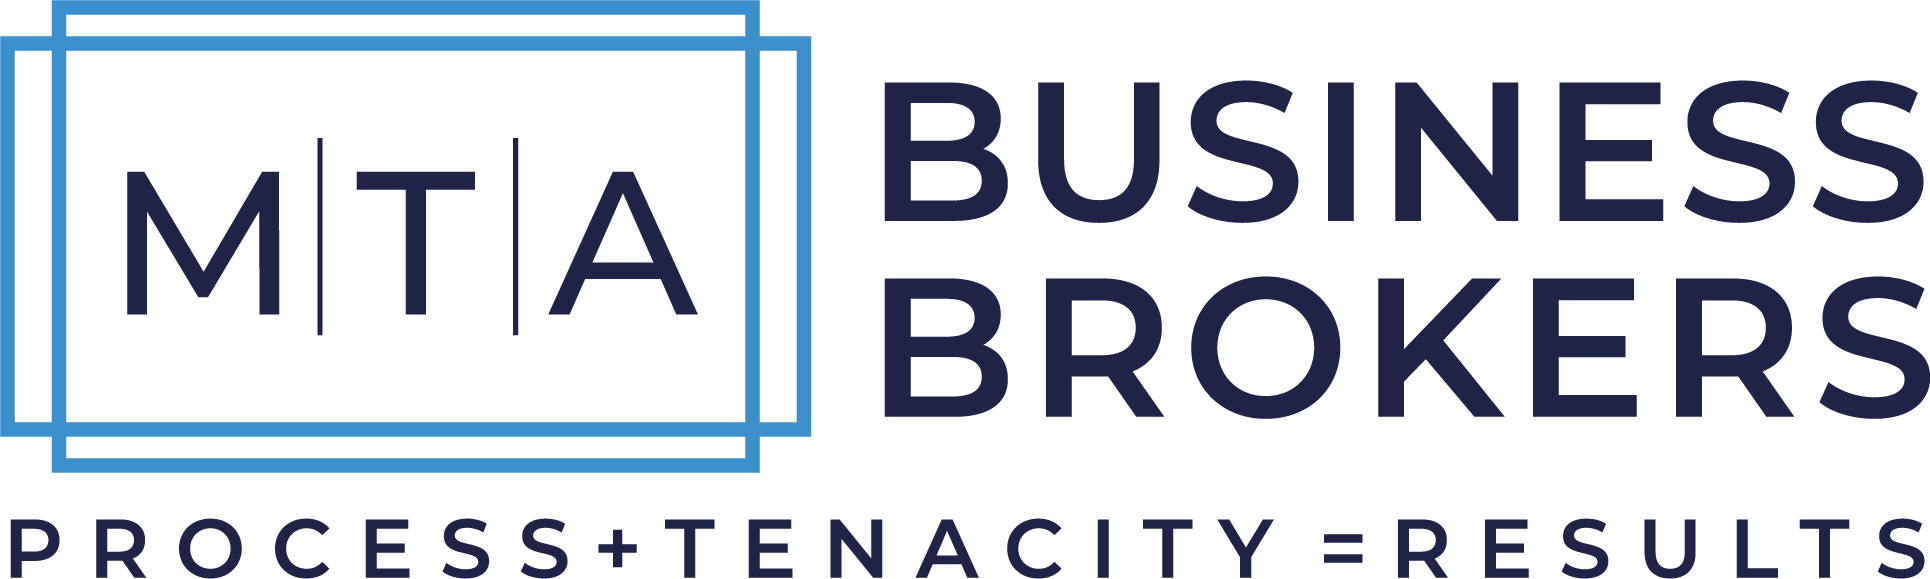 MTA Business Brokers logo with tagline Process Plus Tenacity Equals Results